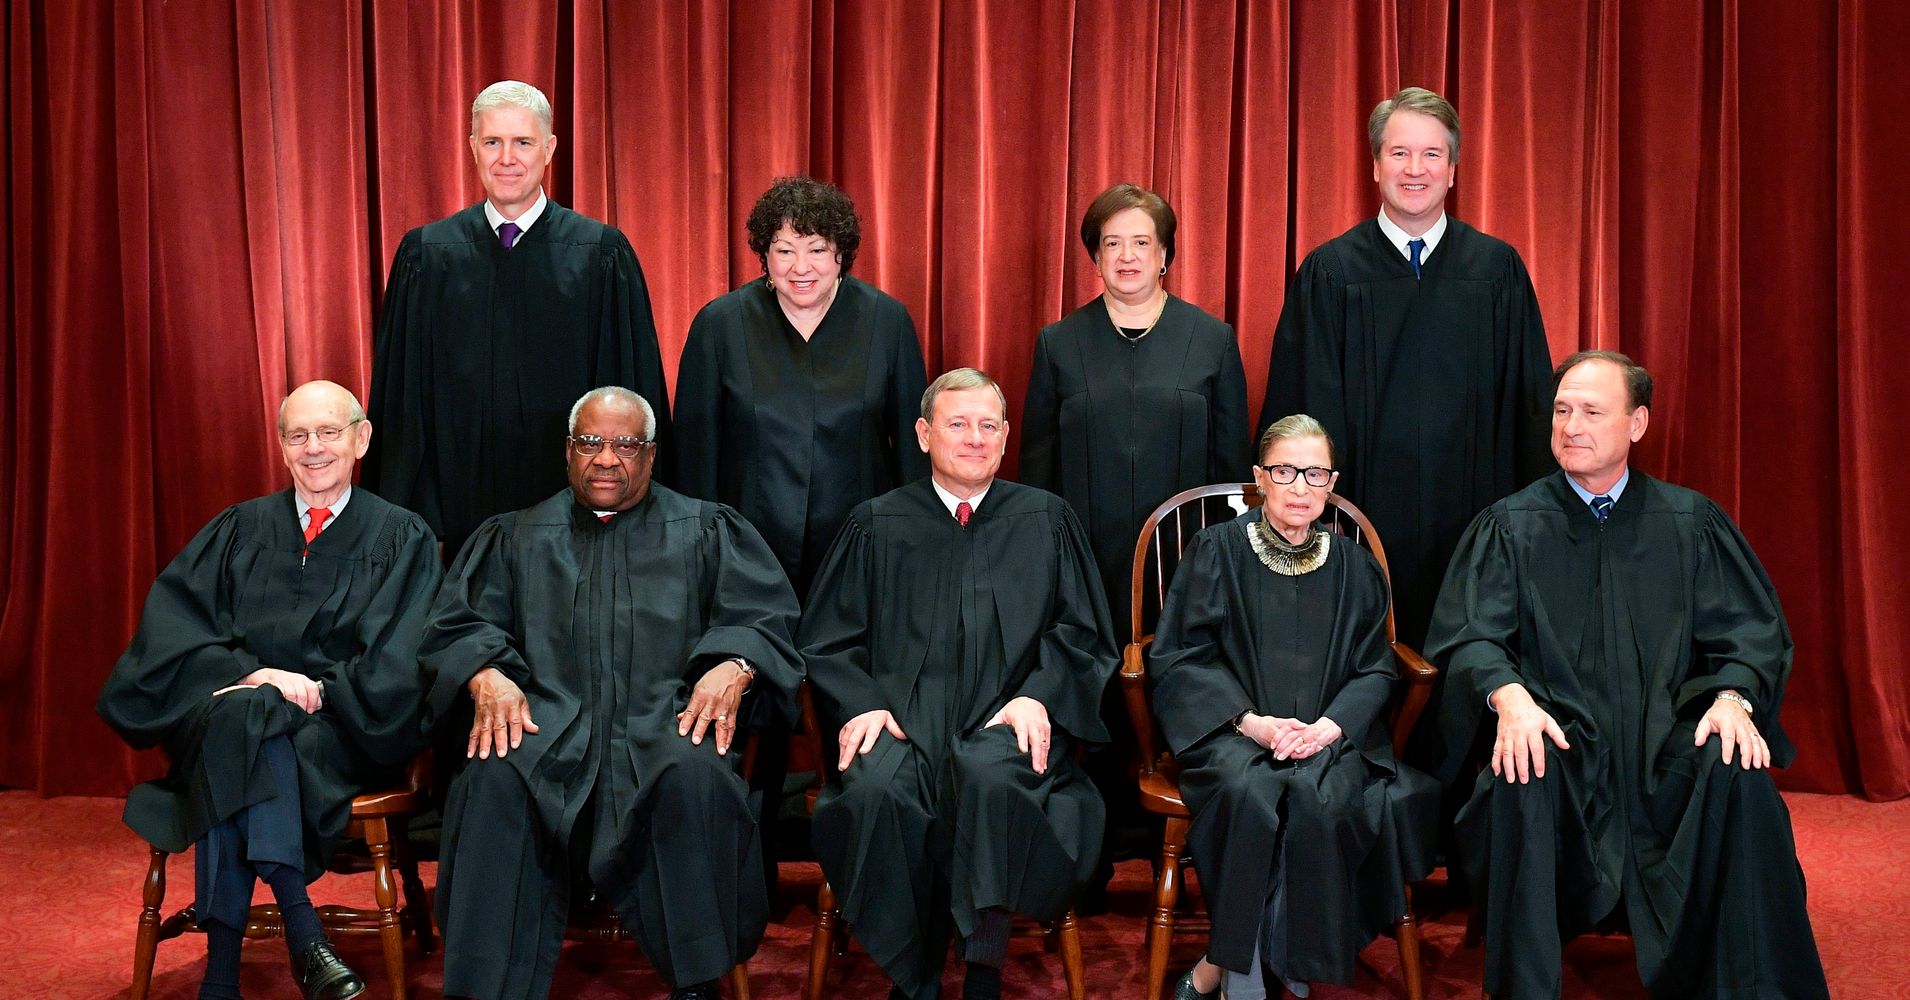 U S Supreme Court Justices Pose For 2018 Class Photo Twitter Users